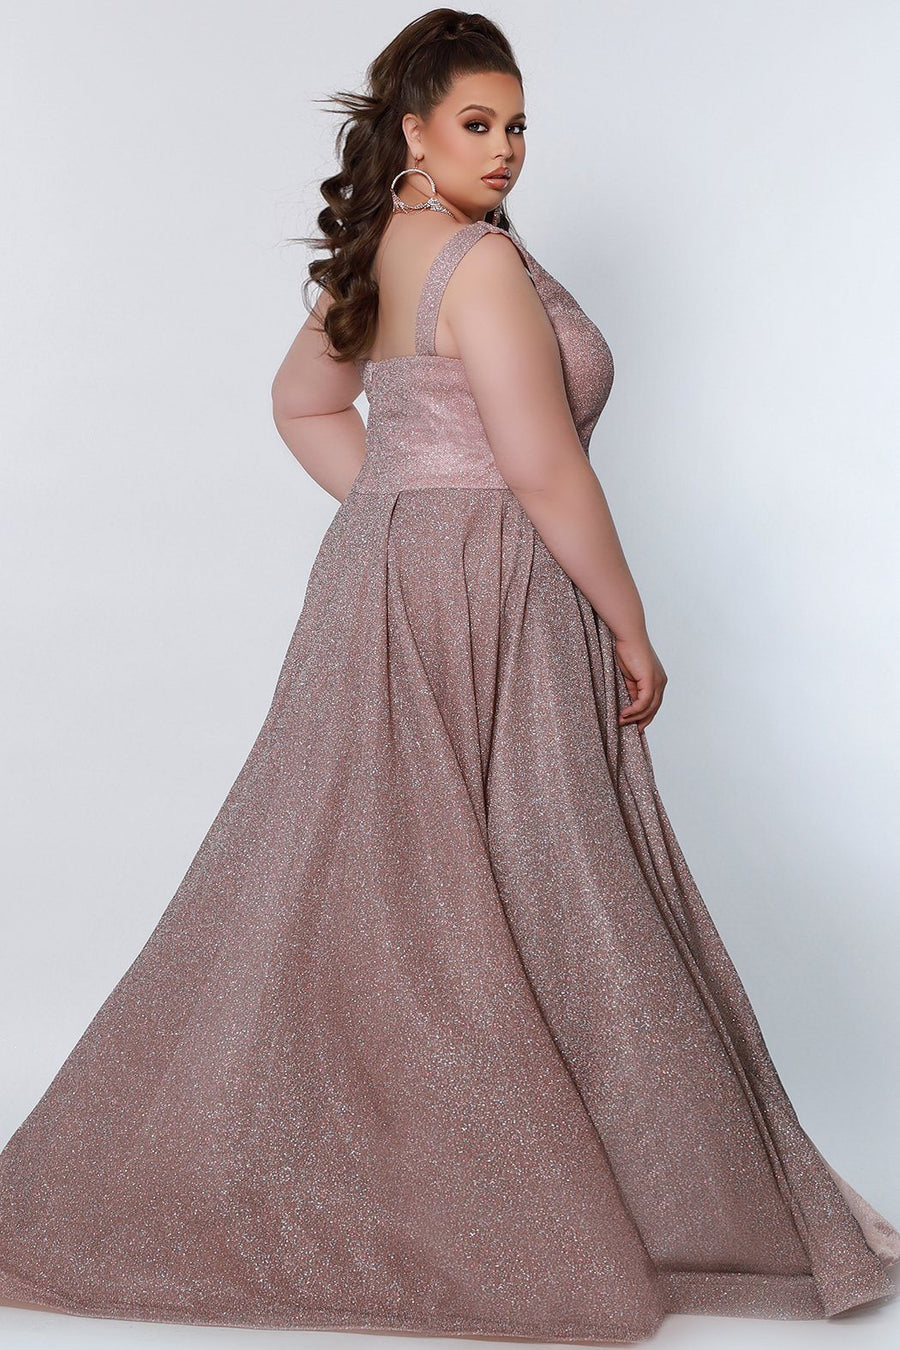 Touch the Stars Pageant Gown SC7313 by Sydney's Closet bra friendly straps mermaid with fly away skirt zipper back and v-neck available in jade and ruby - now avialable for Prom 2022 in purple amethyst, rose gold quartz and onyx black